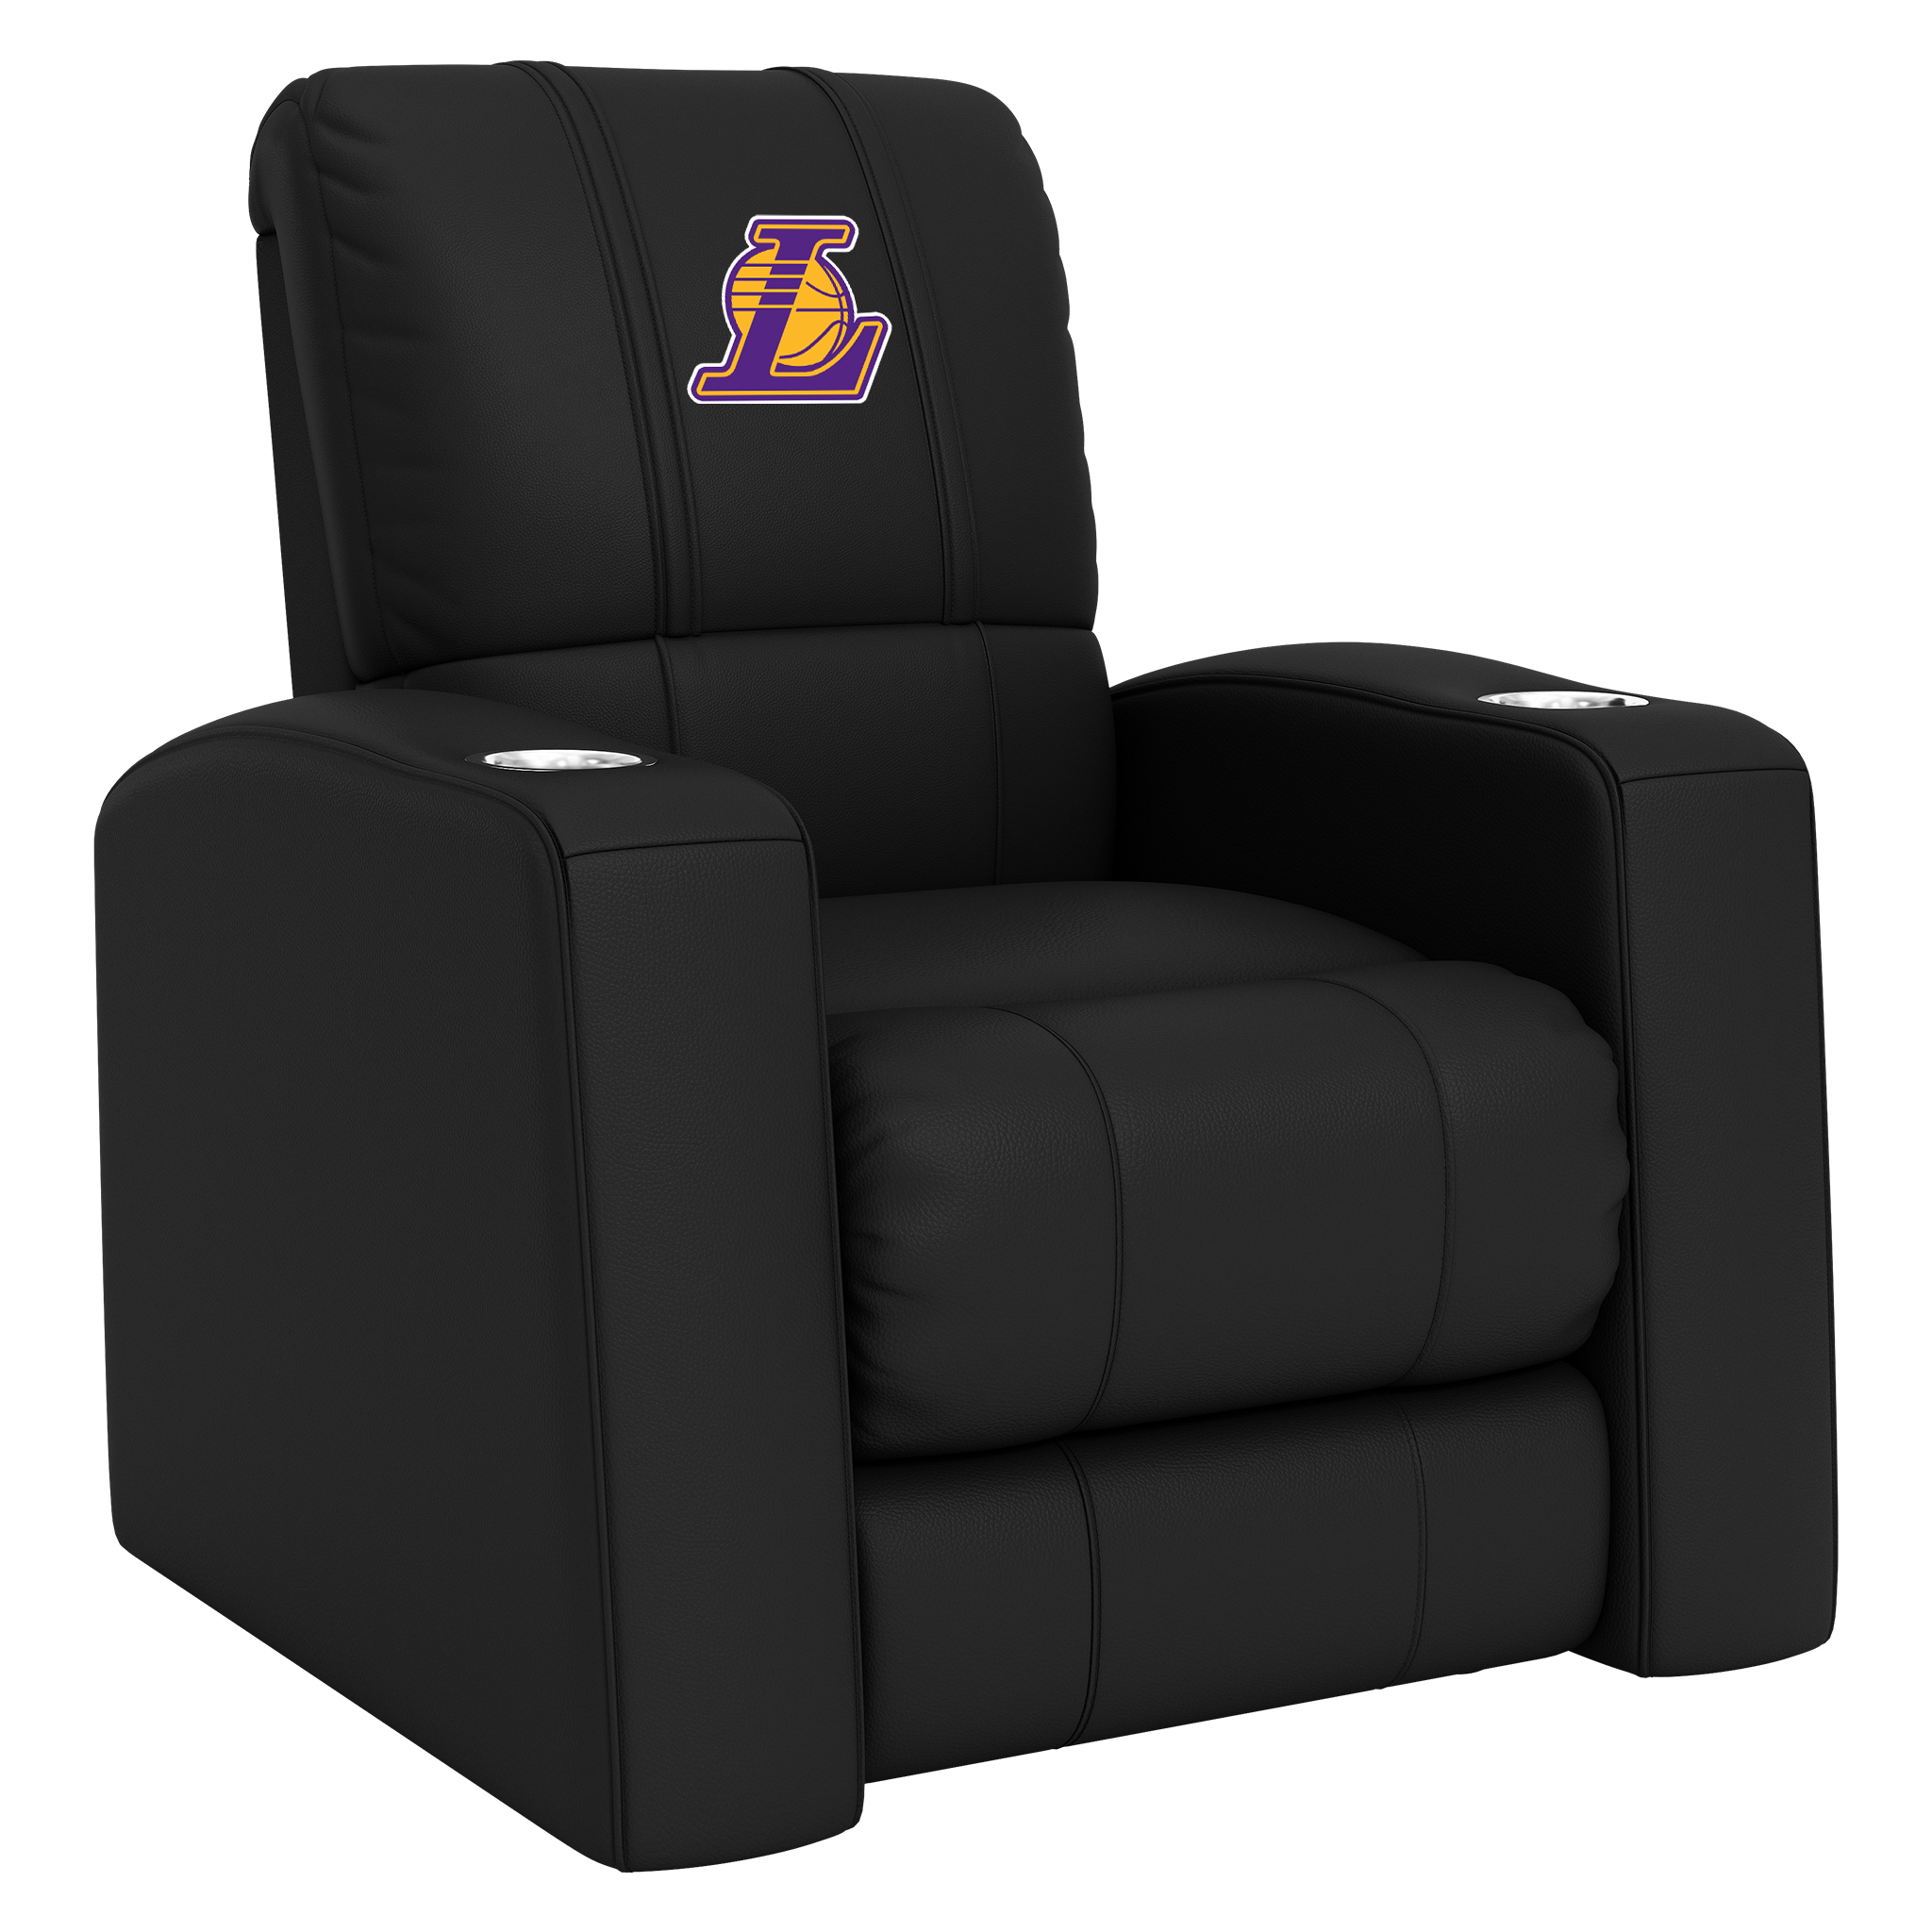 Los Angeles Lakers Home Theater Recliner with Los Angeles Lakers Secondary